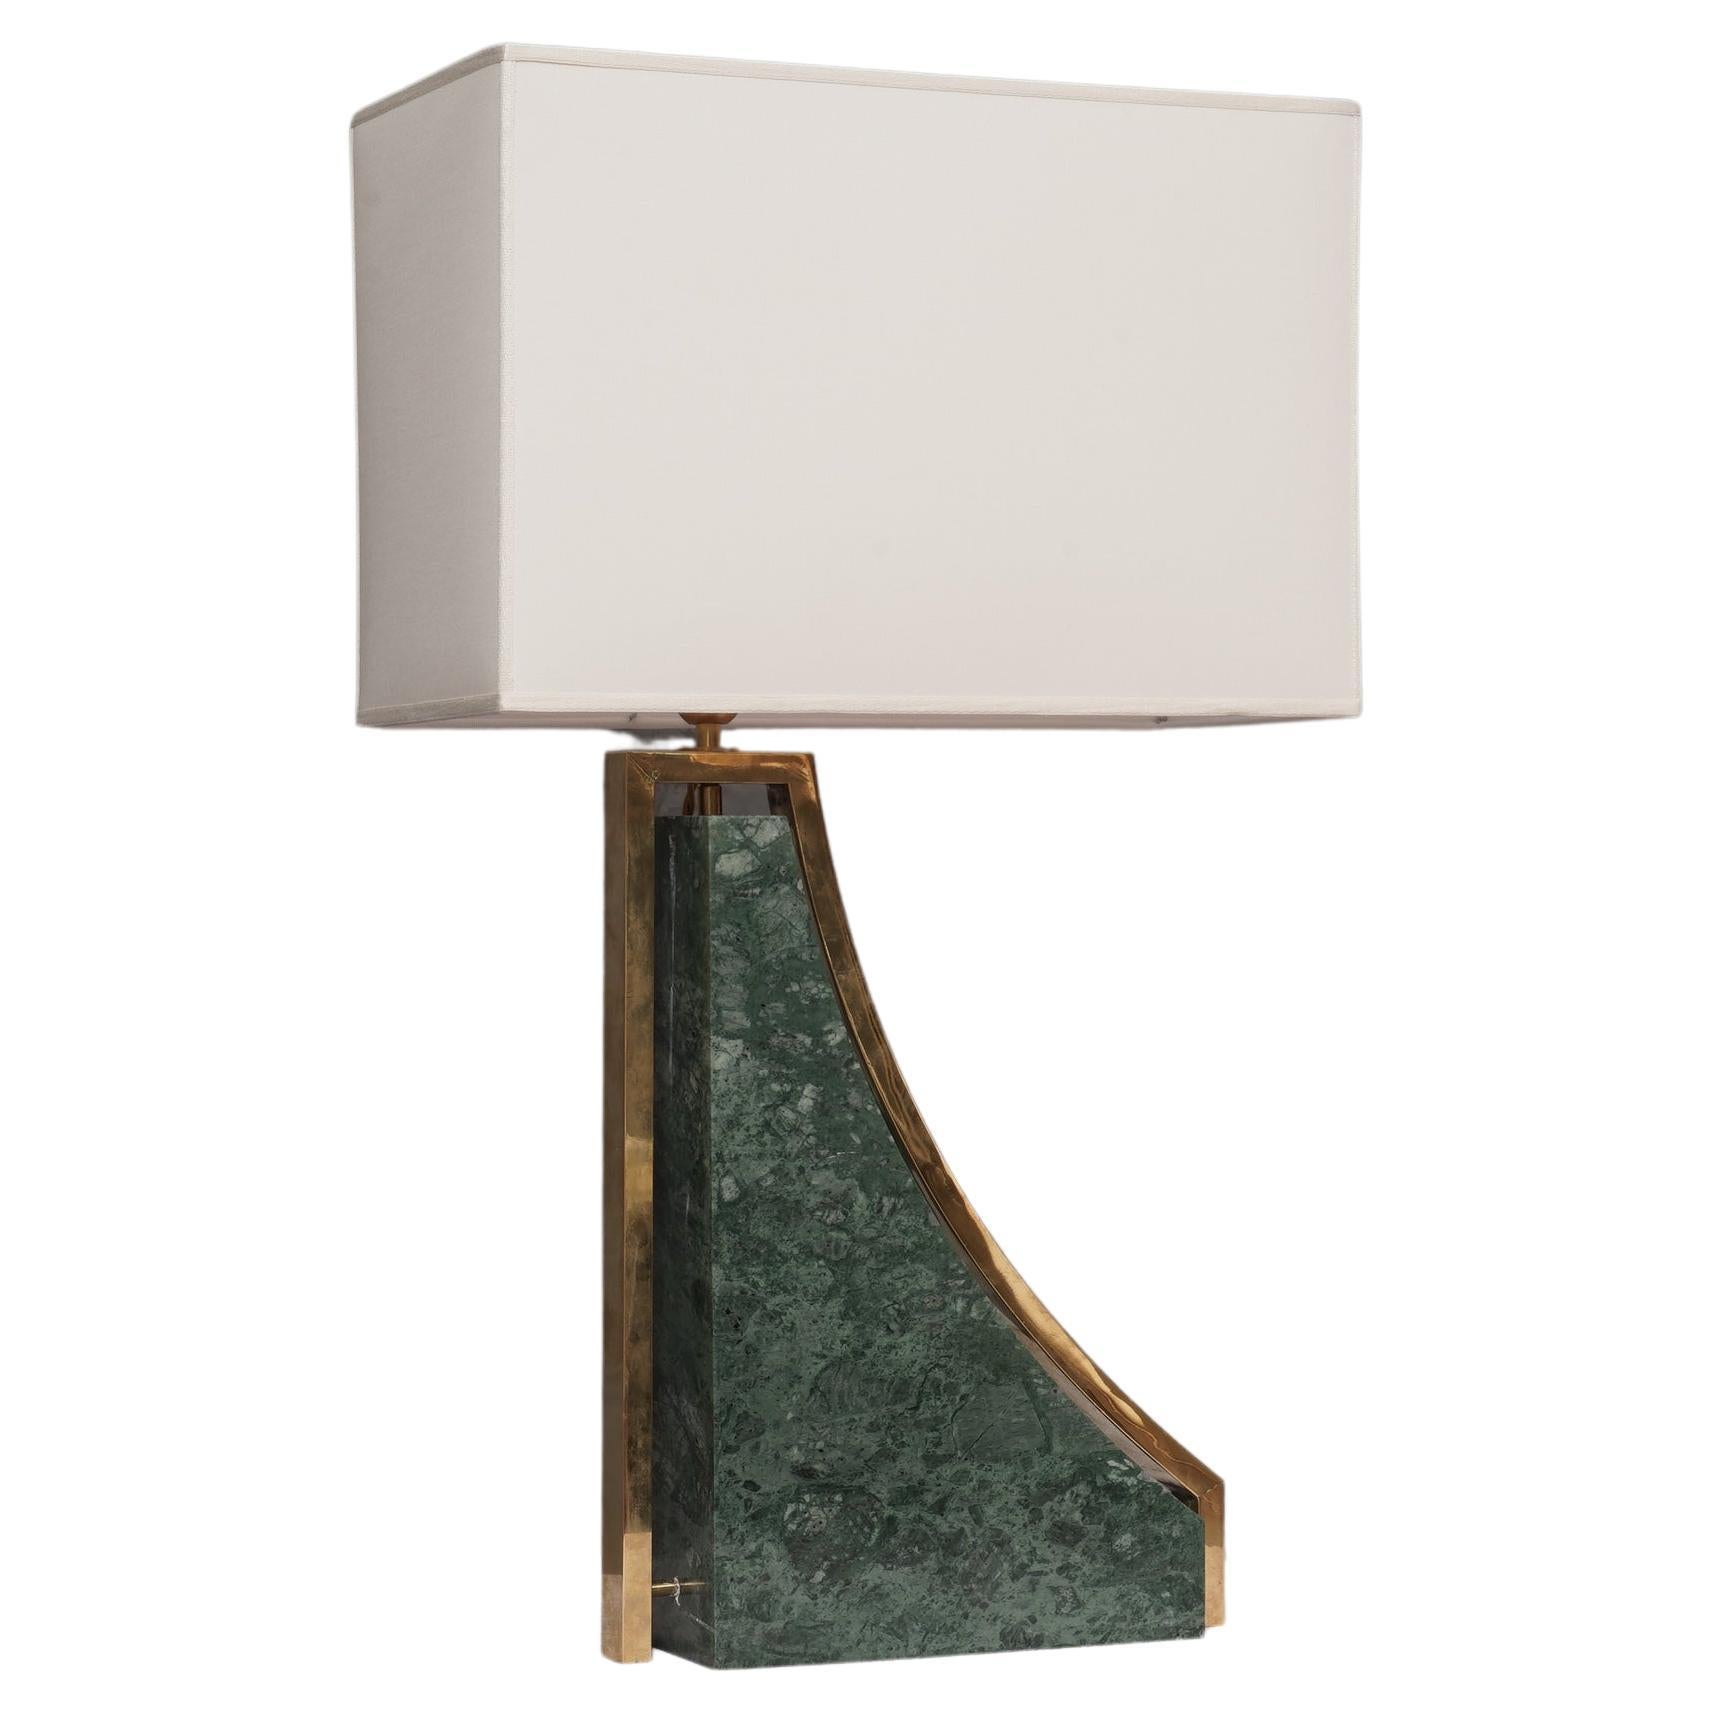 Indian Green Marble and Brass Italian Table Lamp, 2000 For Sale